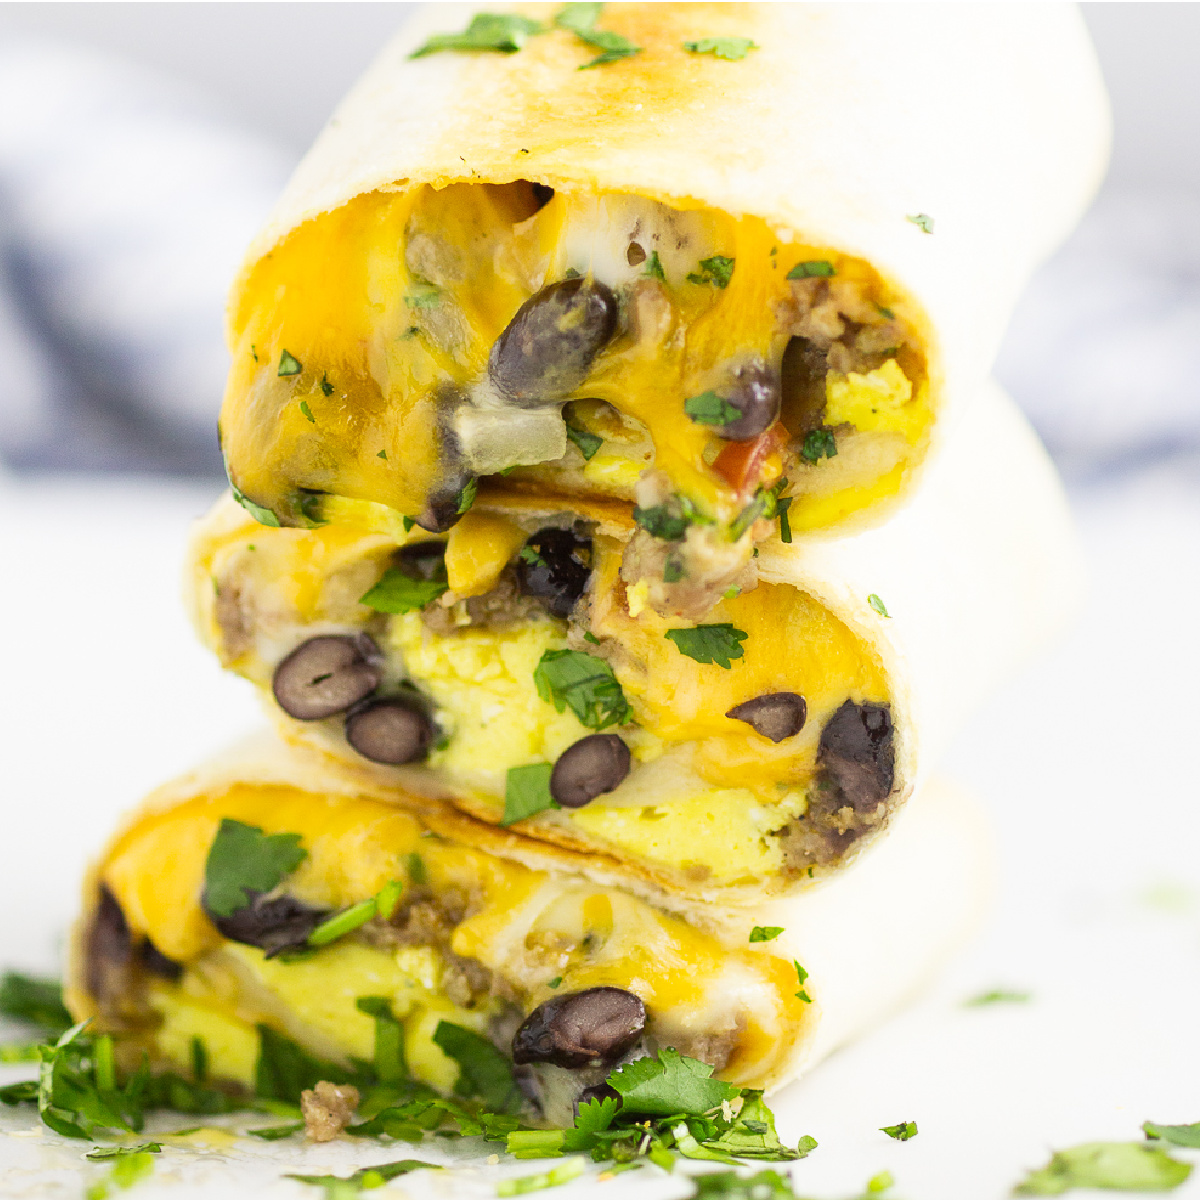 Stack of three halves of frozen breakfast burritos with the ingredients, including eggs, black beans, and cheese with cilantro sprinkled around on a white marble surface